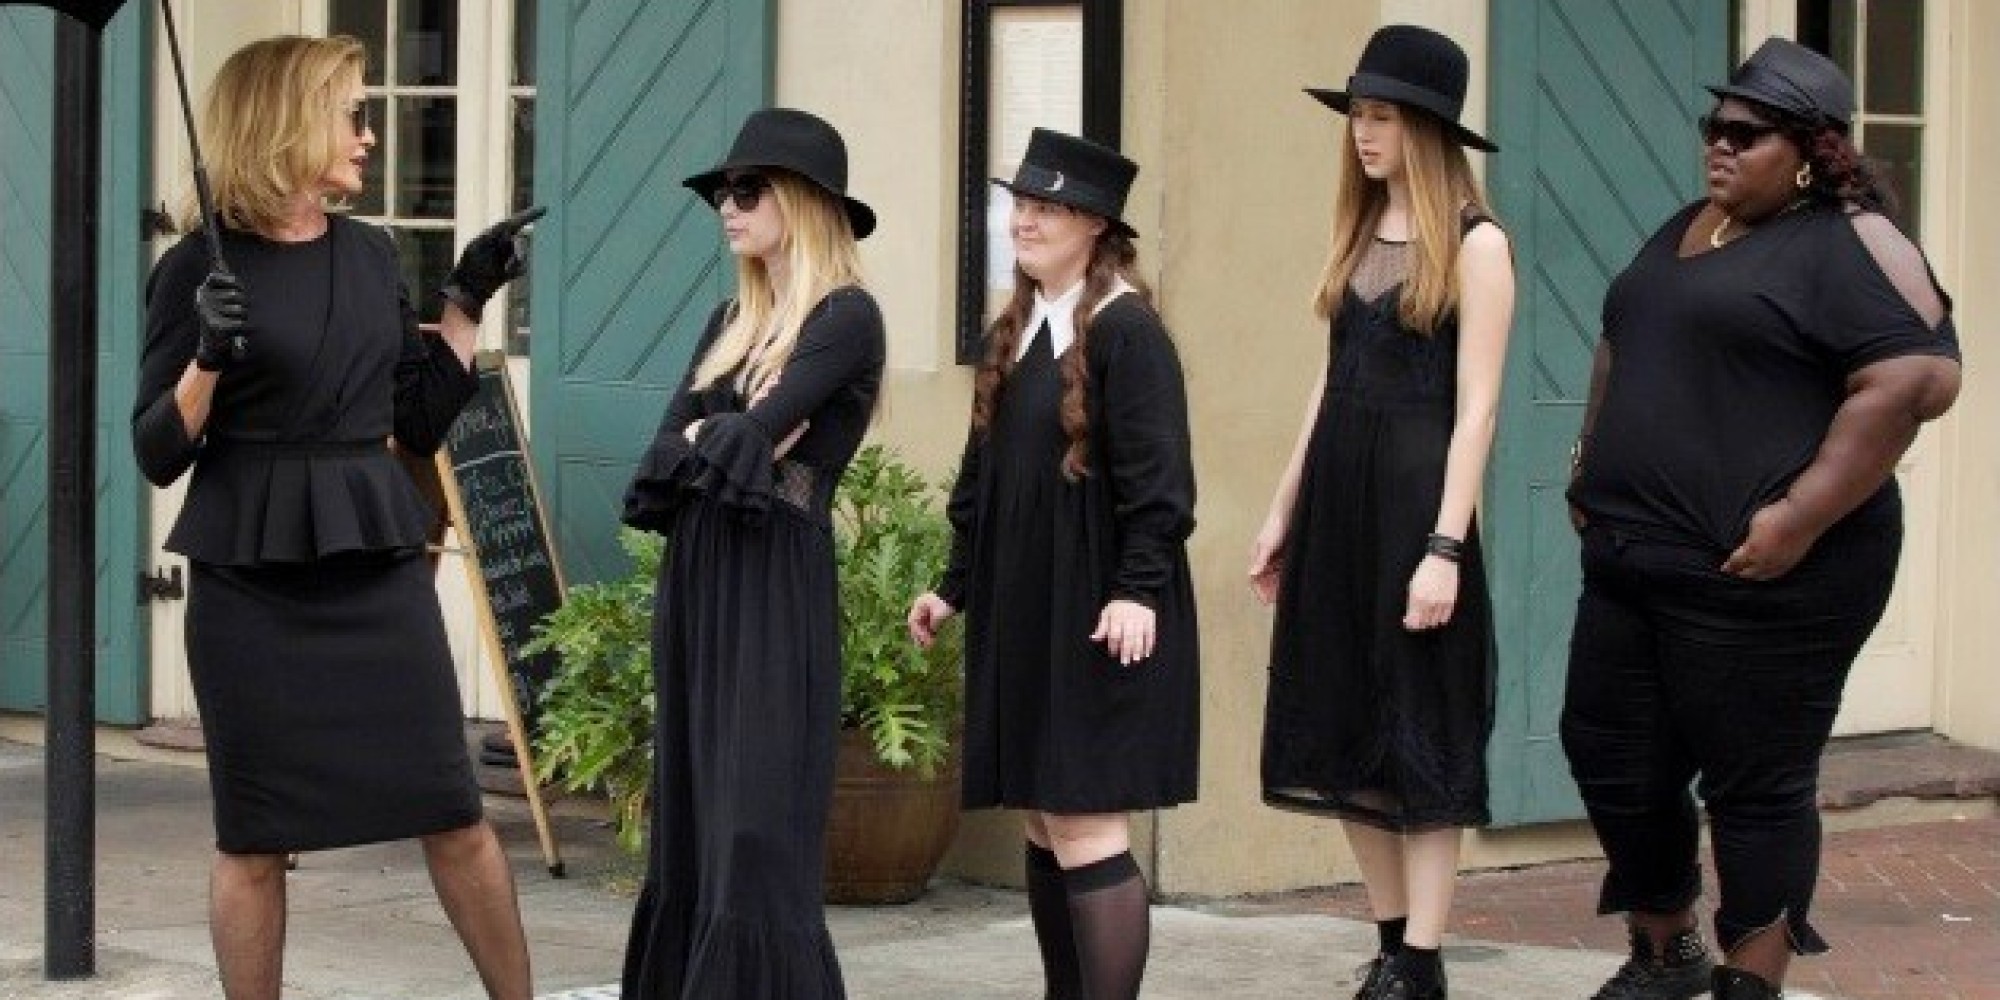 American Horror Story Season 3 Spoilers: Synopsis For 